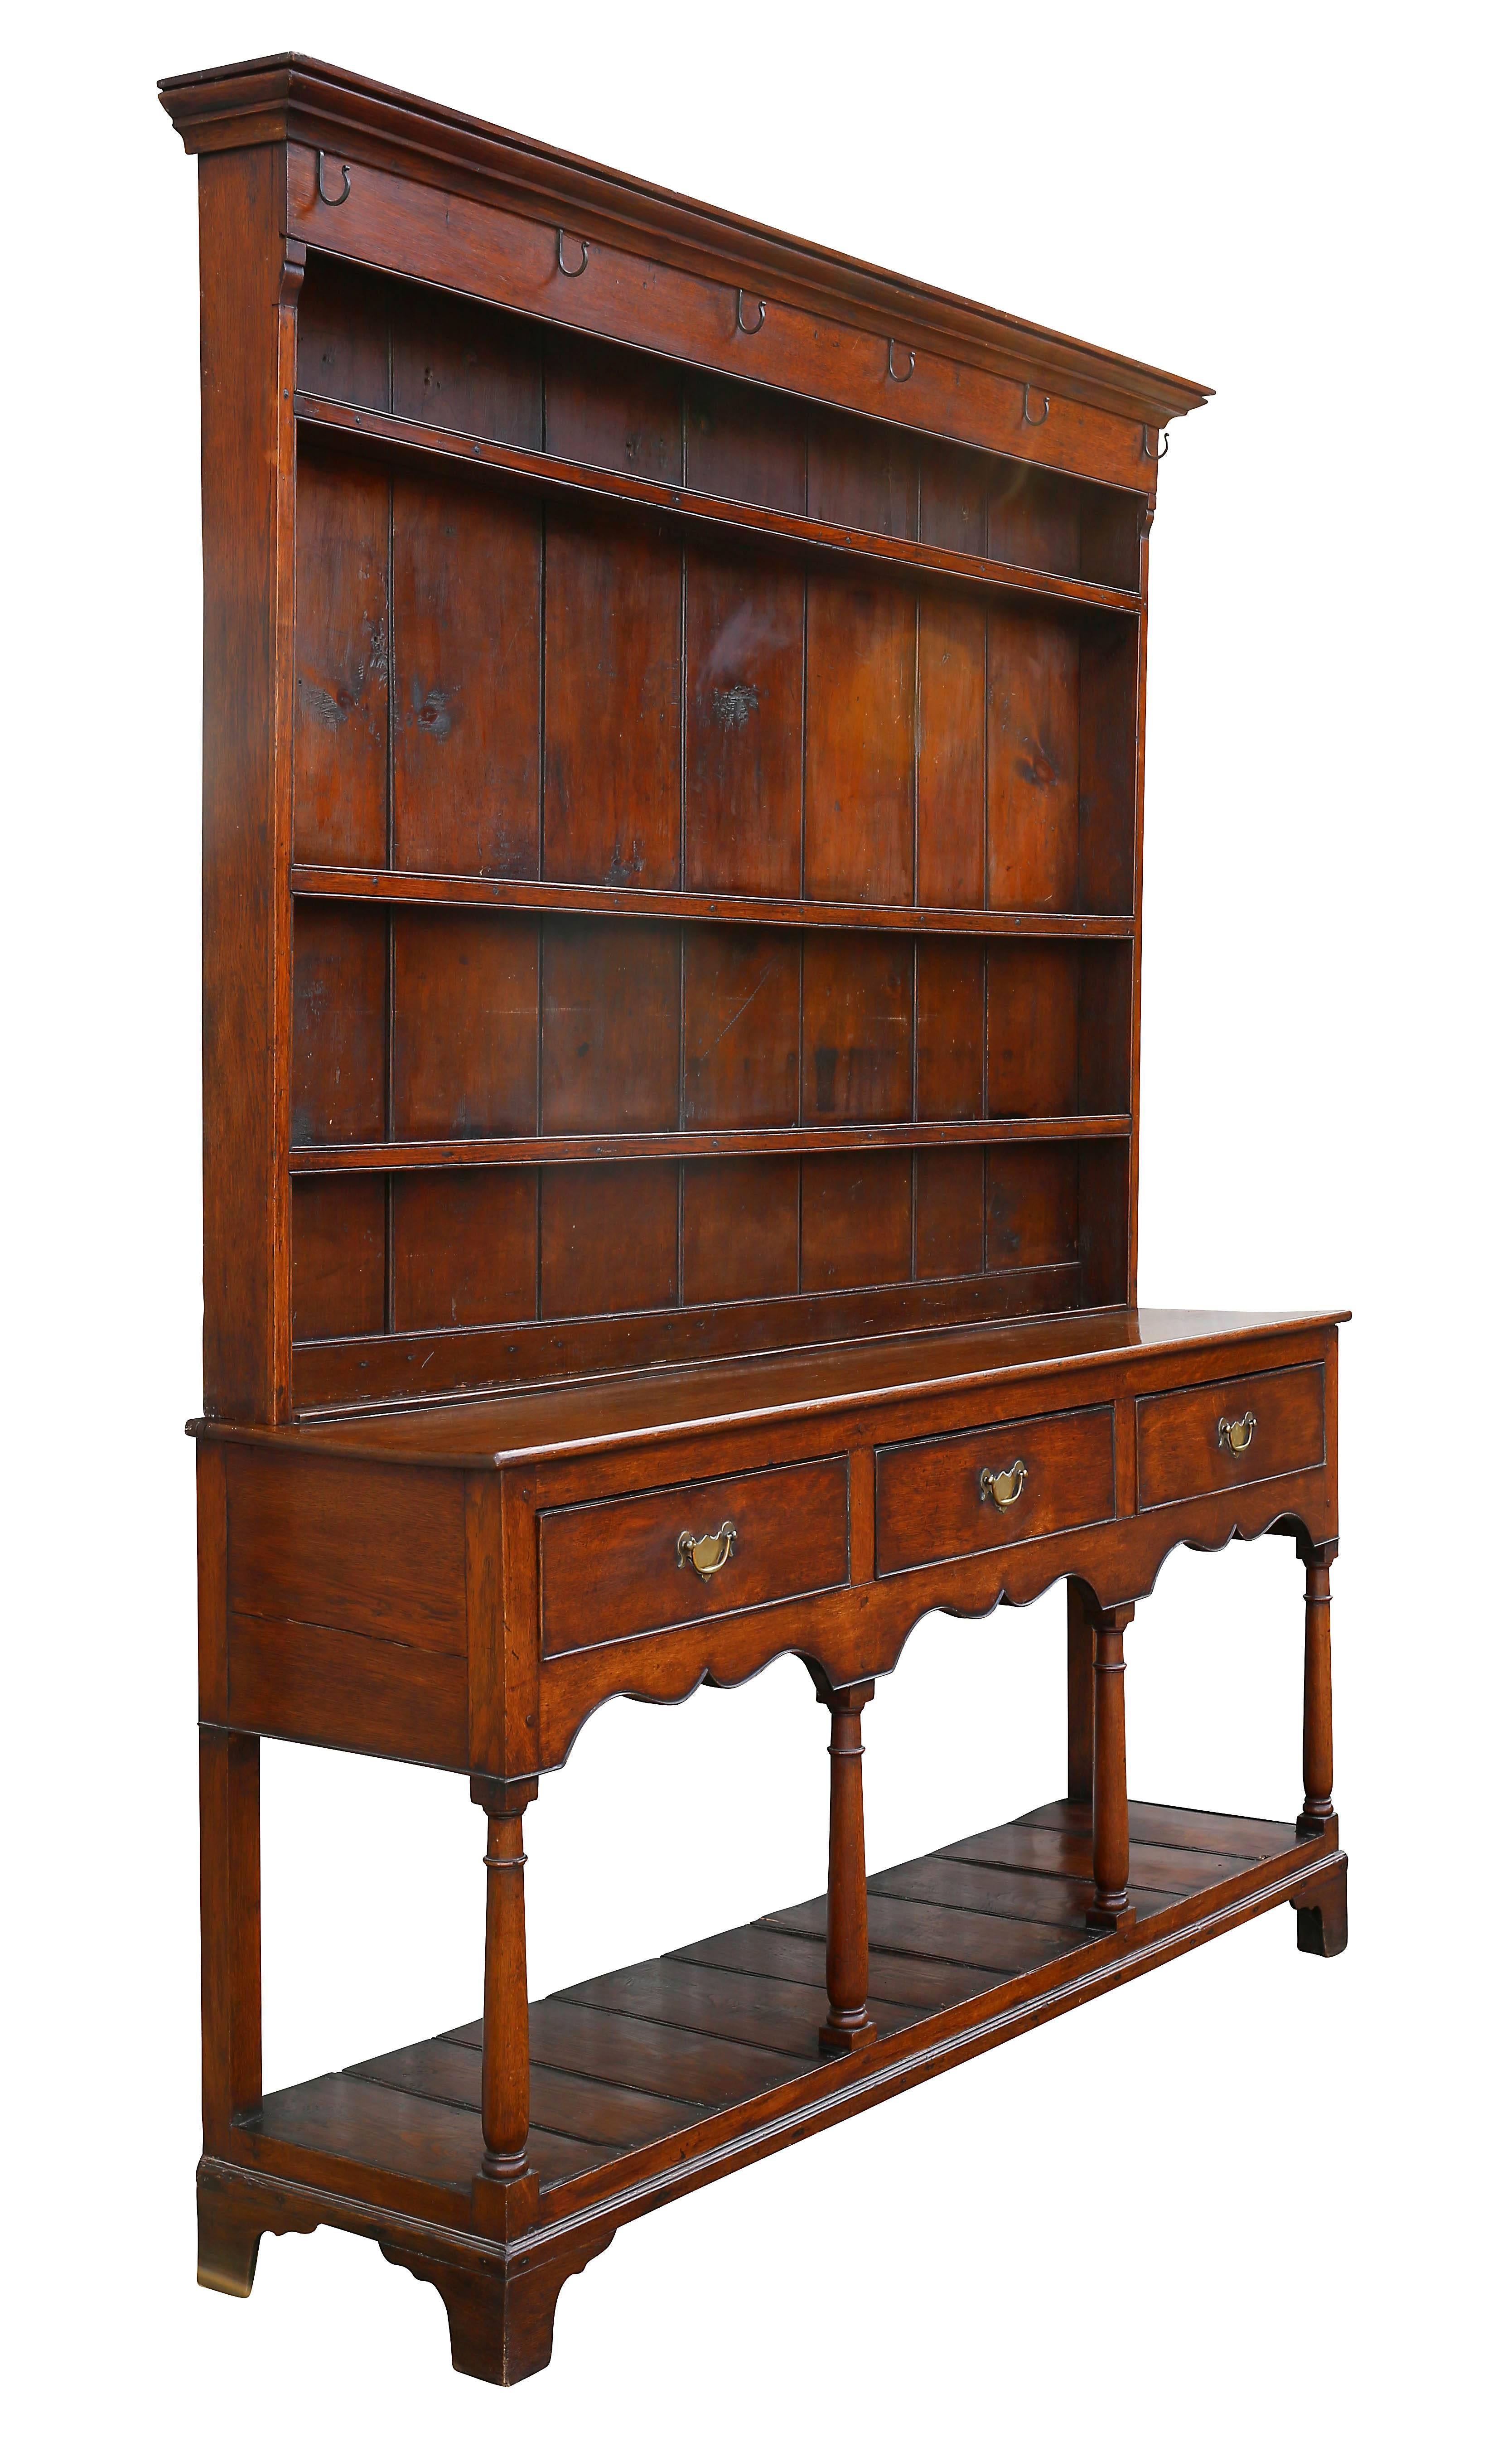 In two parts with molded cornice with cup holder nails above three shelves, the base with three drawers and shaped apron above a lower pot shelf supported with columns, bracket base.